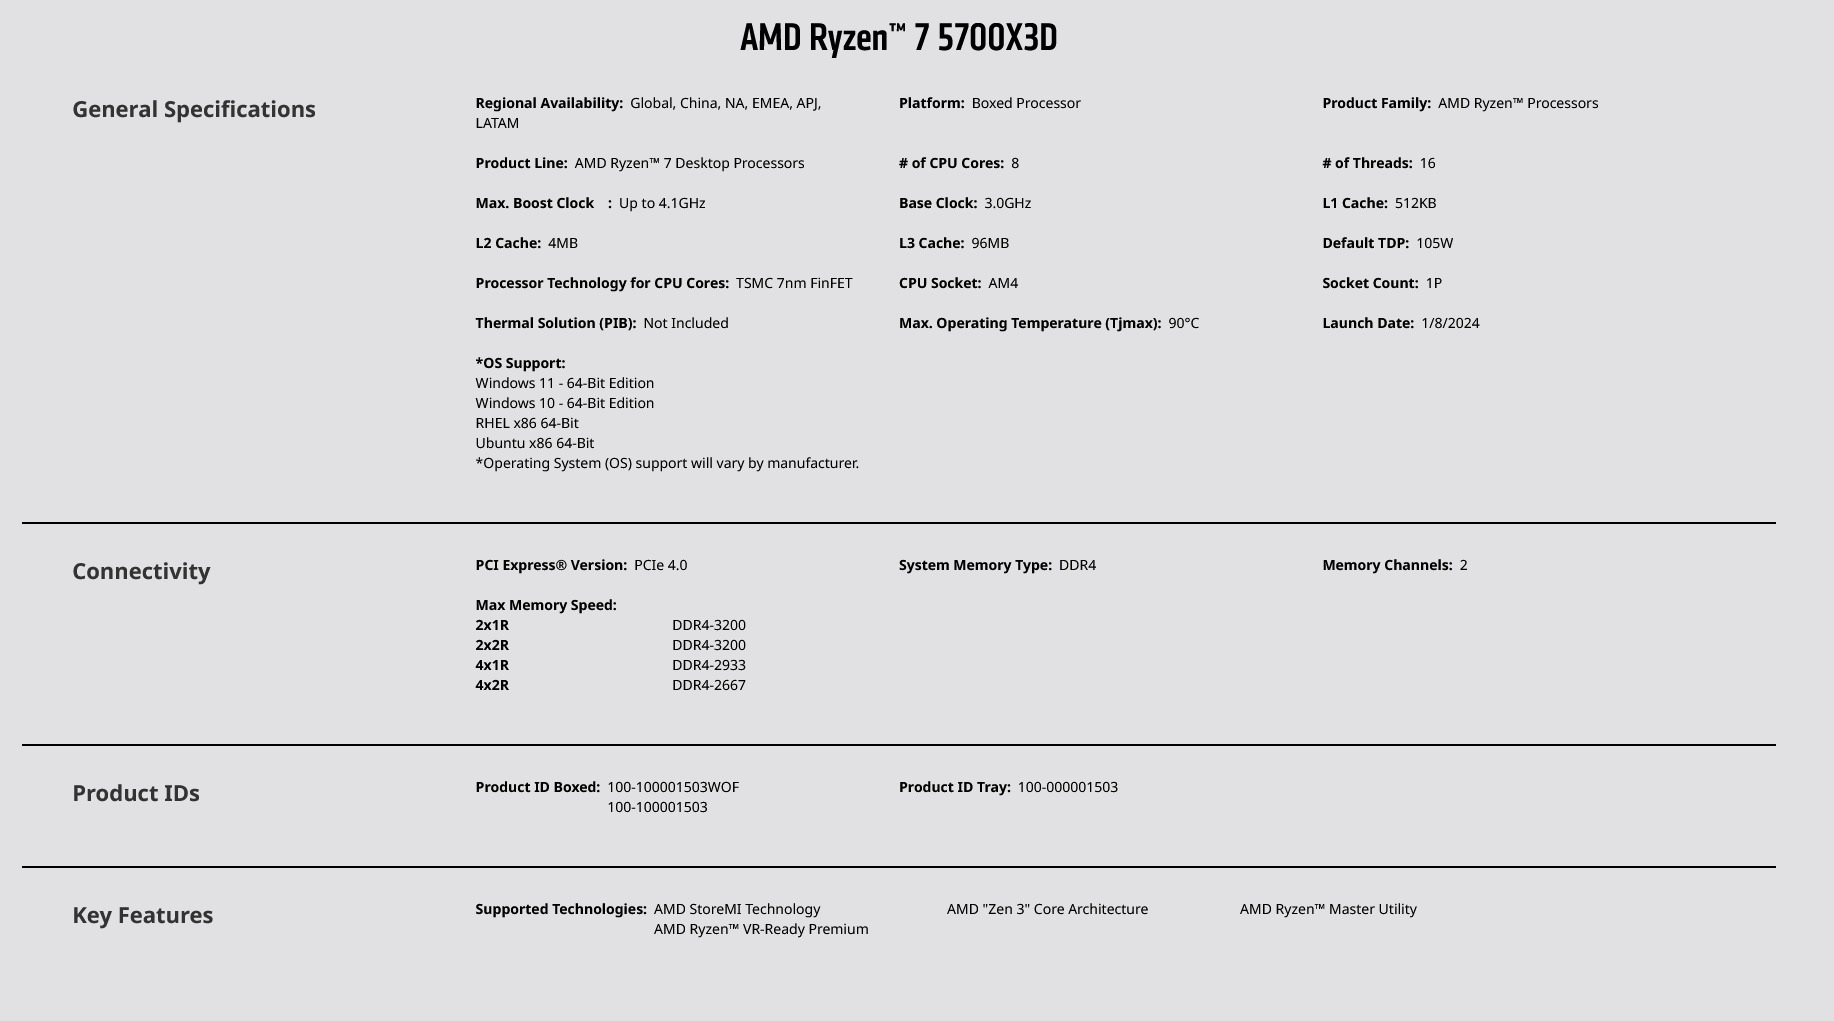 A large marketing image providing additional information about the product AMD Ryzen 7 5700X3D 8 Core 16 Thread Up To 4.1GHz AM4 - No HSF Retail Box - Additional alt info not provided